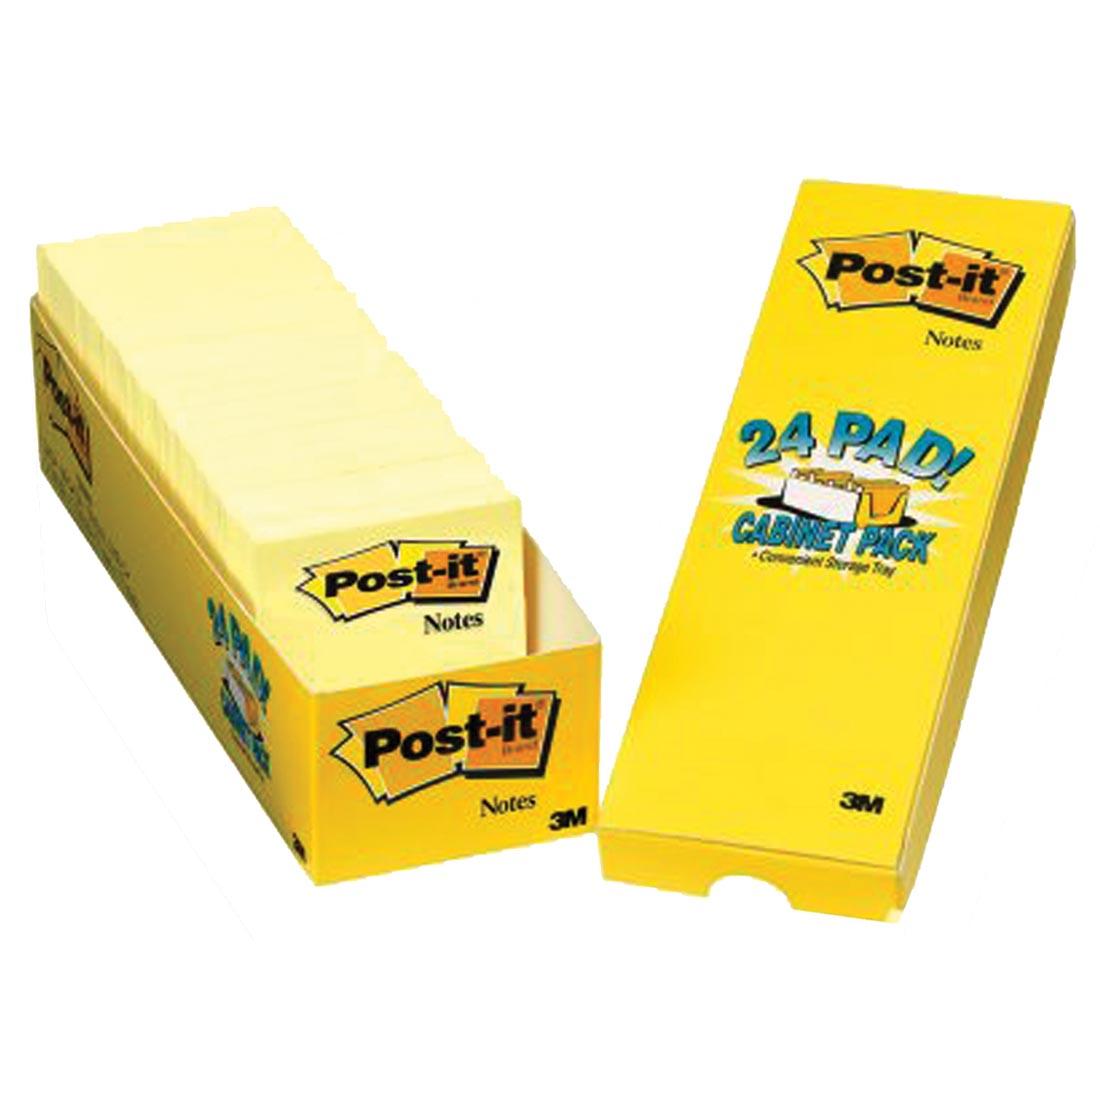 Post-it Super Sticky Notes Canary Yellow 24 Pad Cabinet Pack